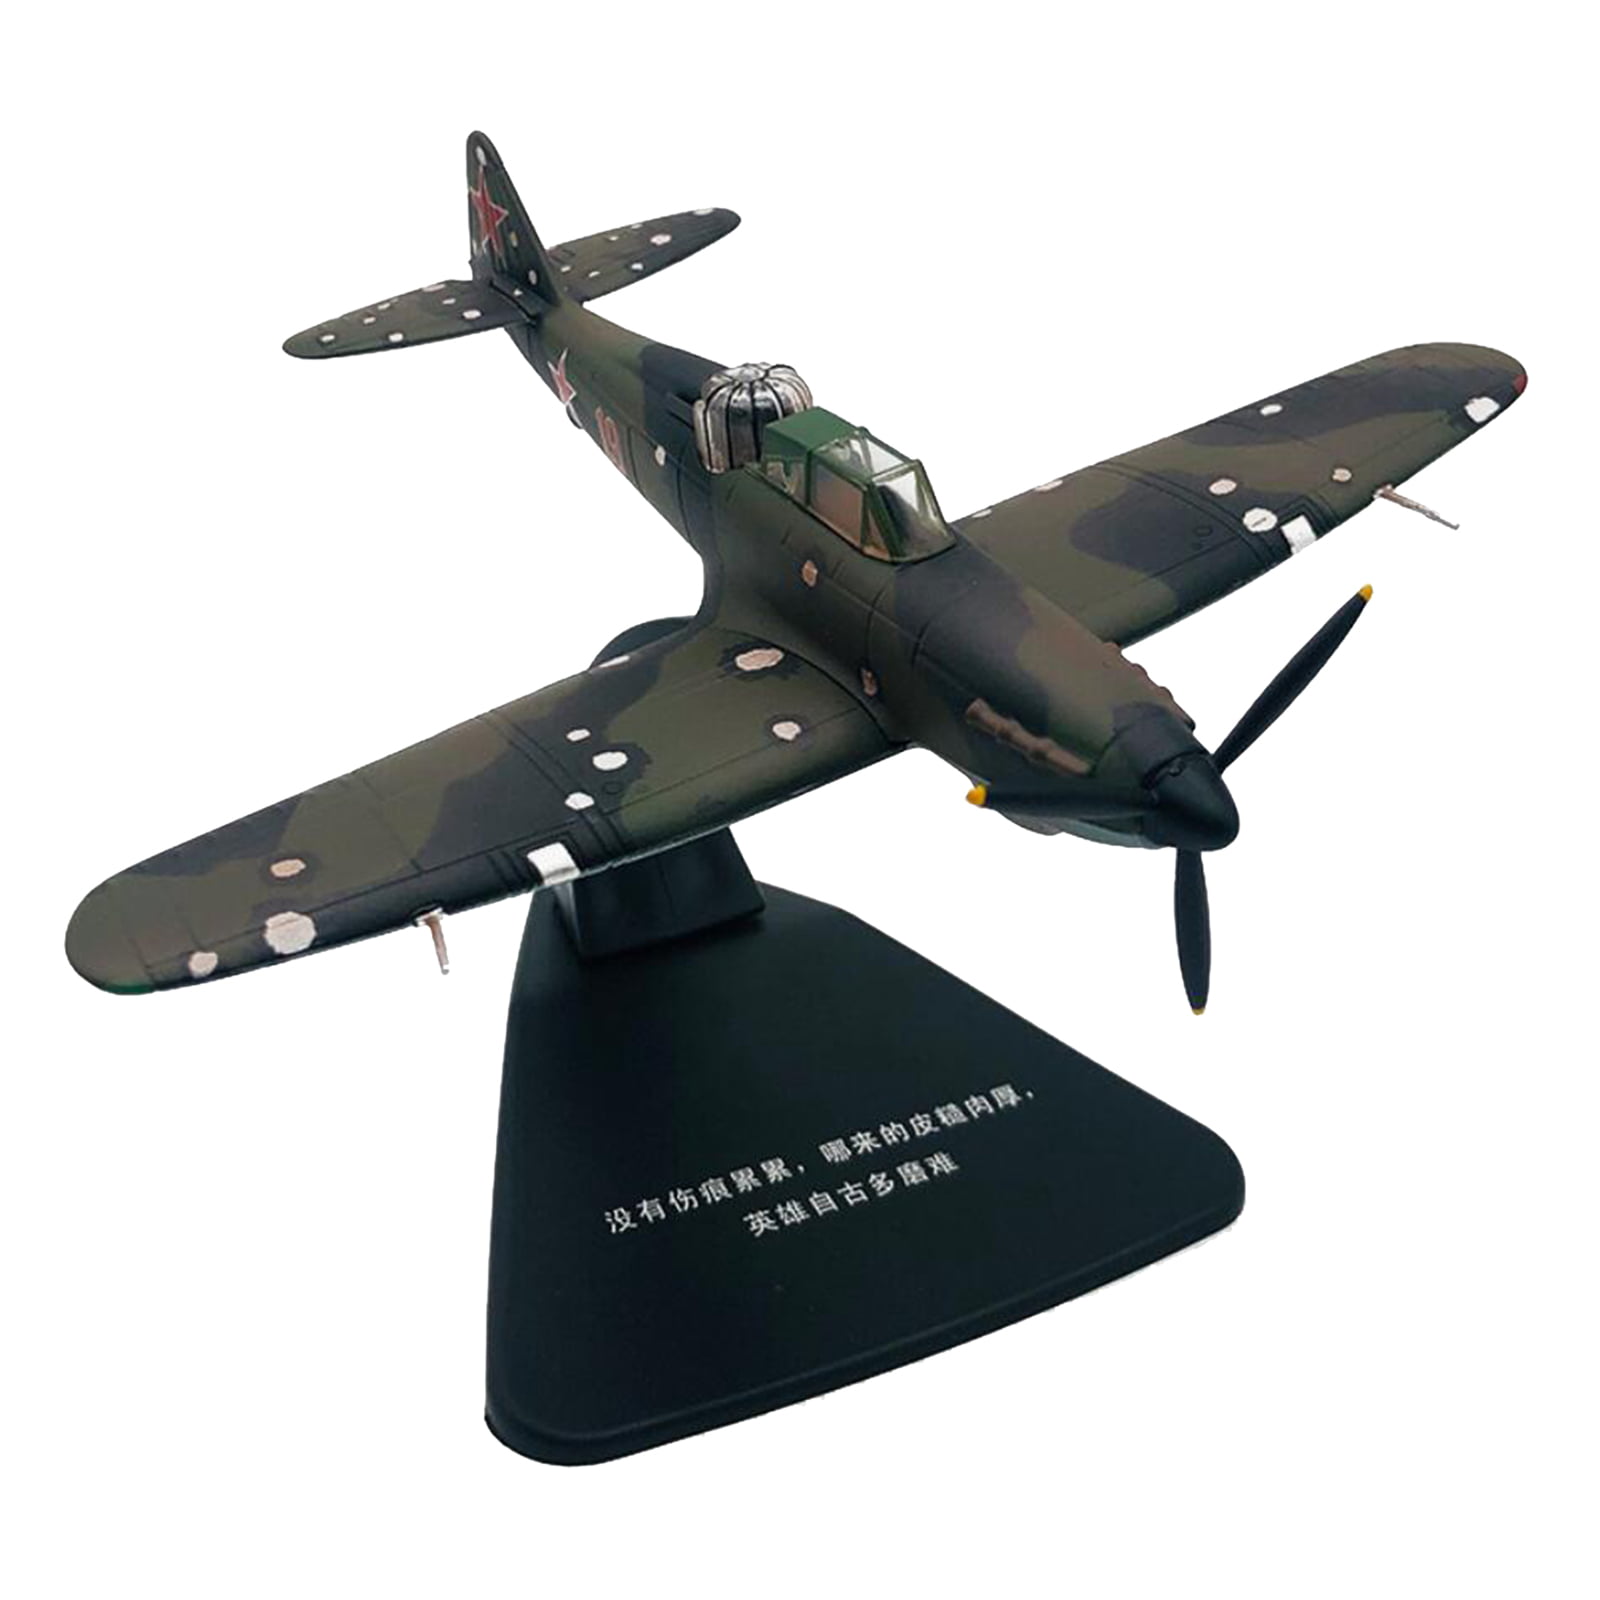 Details about   1:76 Alloy Model Kits WWII IL-2 Attacker Aircraft Diecast   Planes 